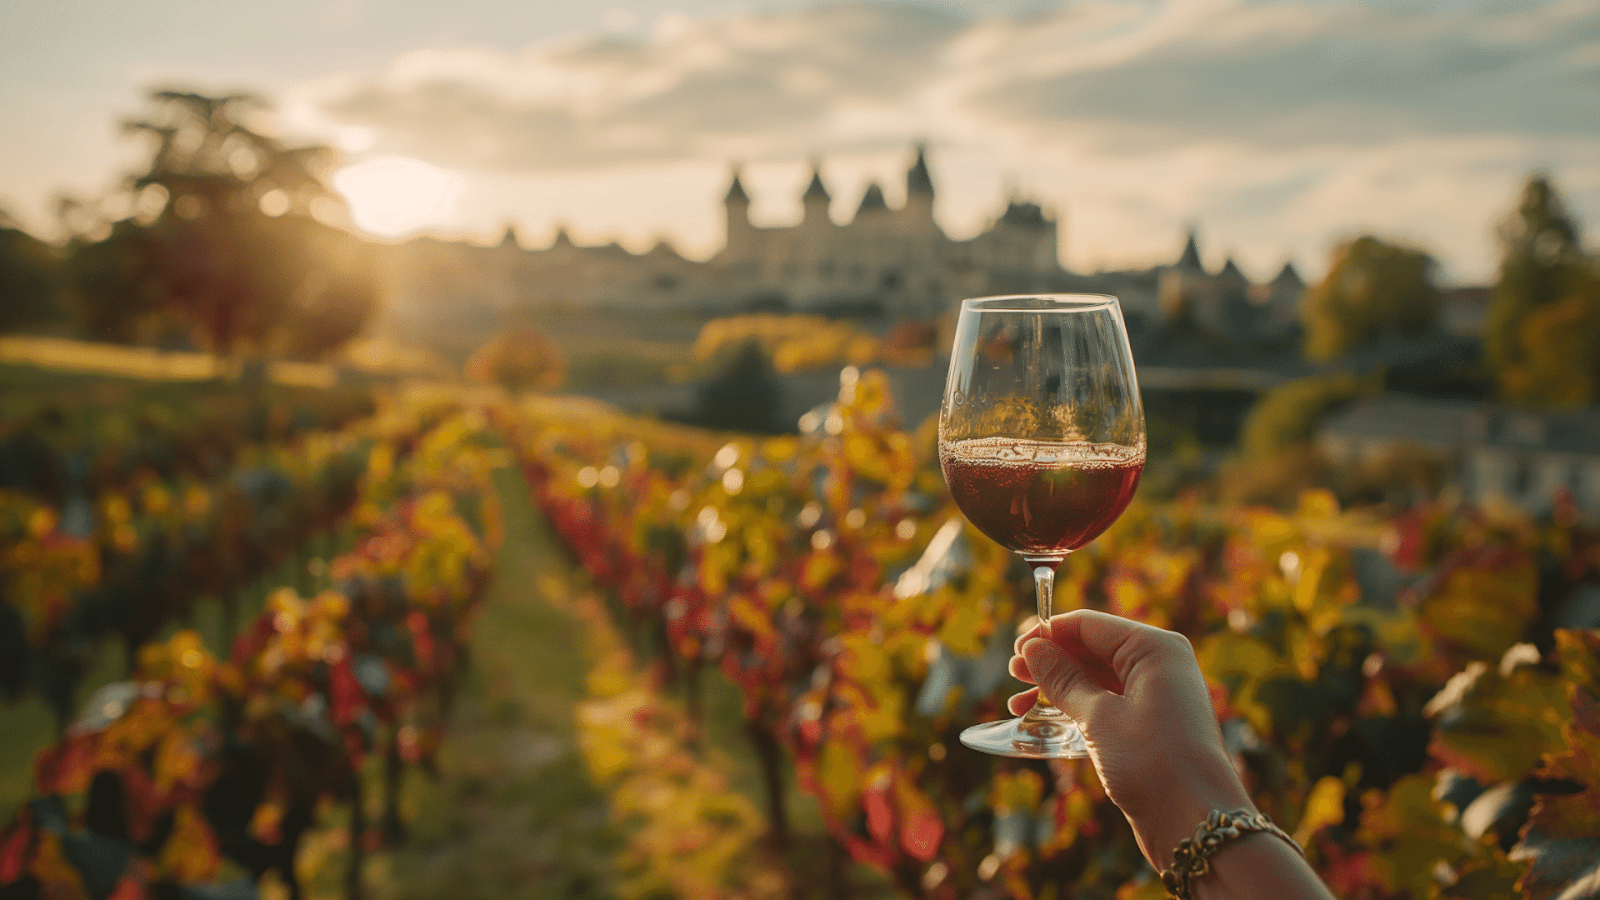 Holding wine glass with castle backdrop, savoring Europe's finest